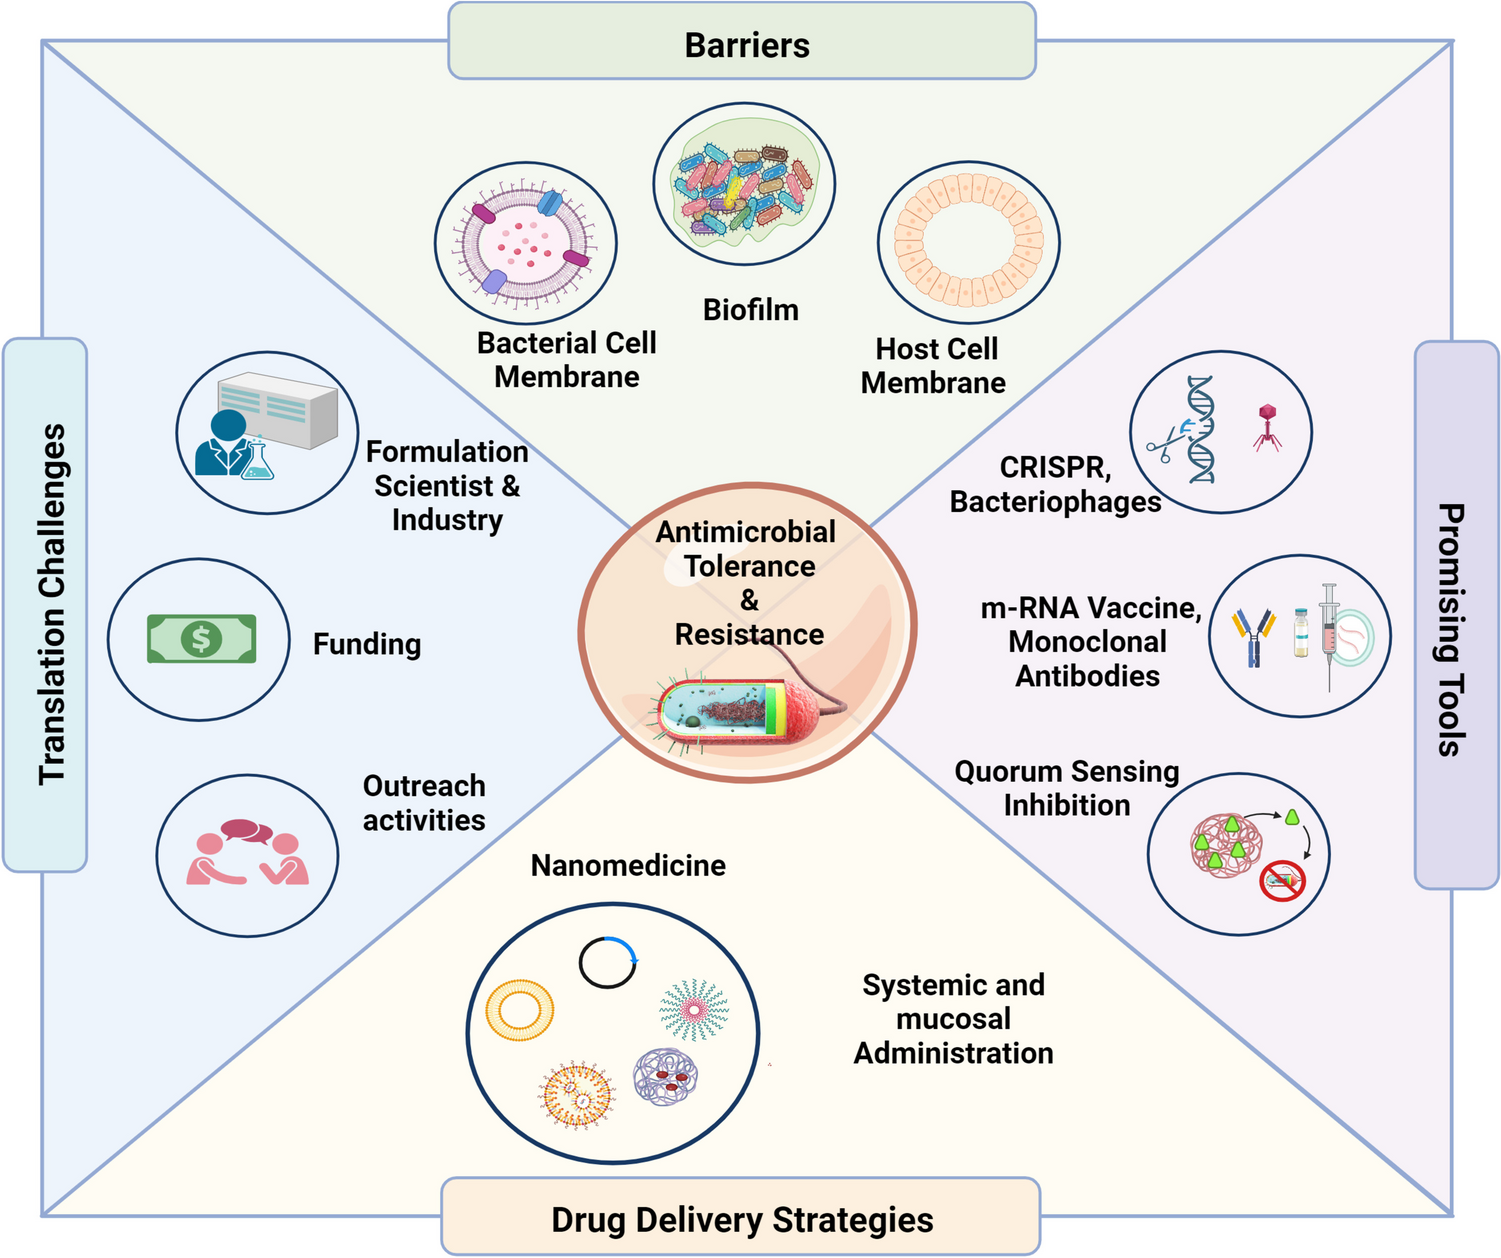 Antibiotic resistance and tolerance: What can drug delivery do against this global threat?